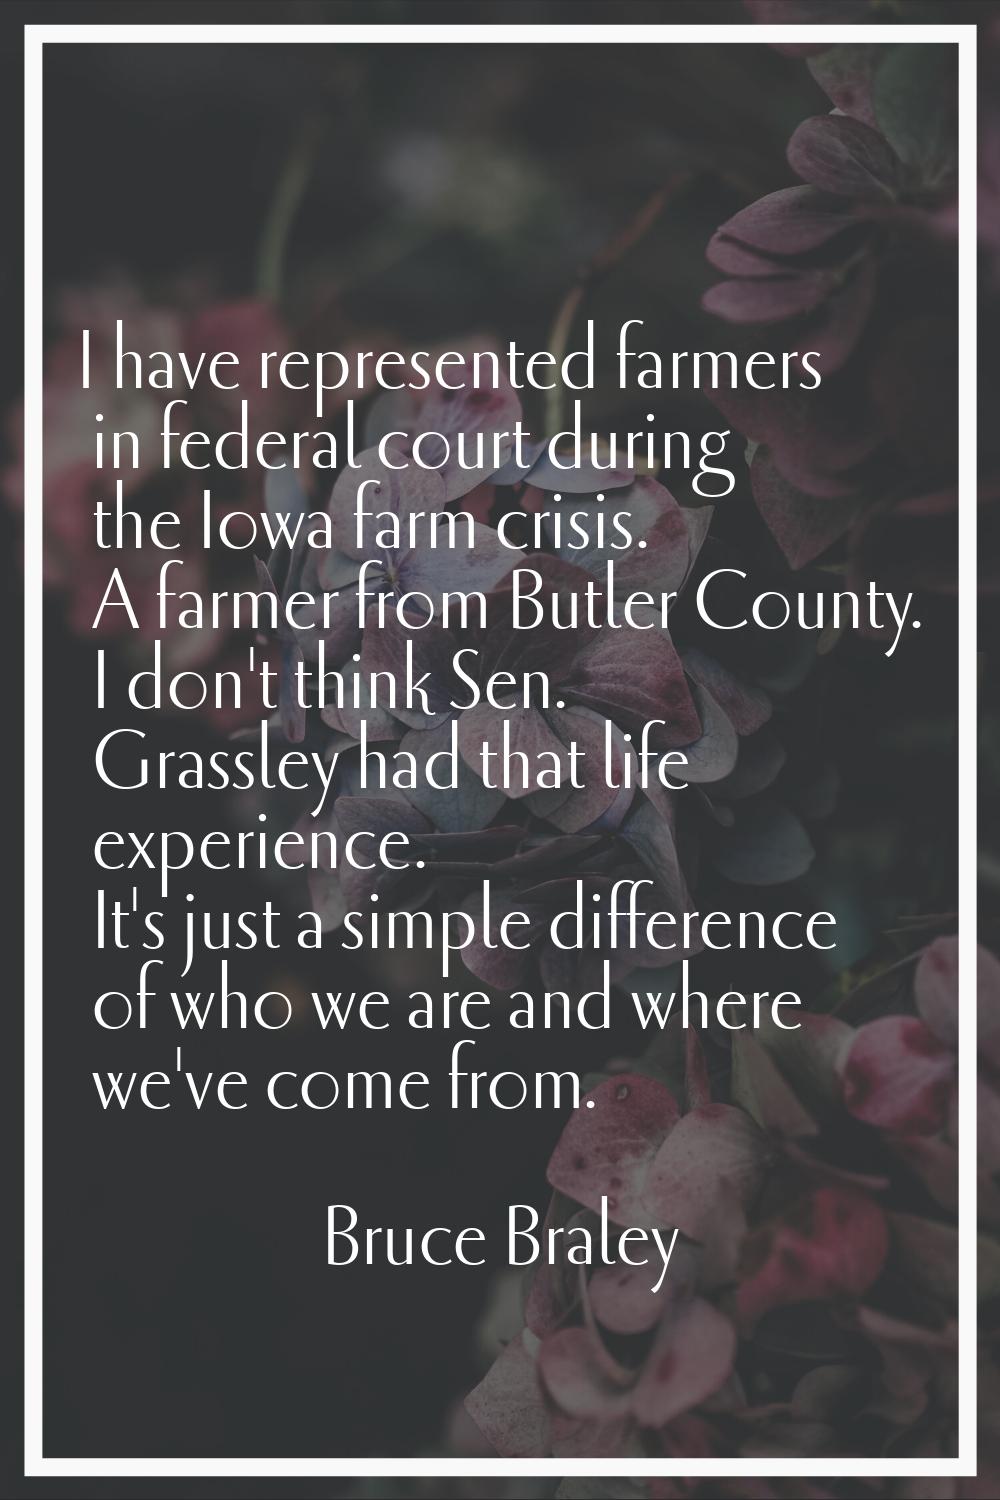 I have represented farmers in federal court during the Iowa farm crisis. A farmer from Butler Count